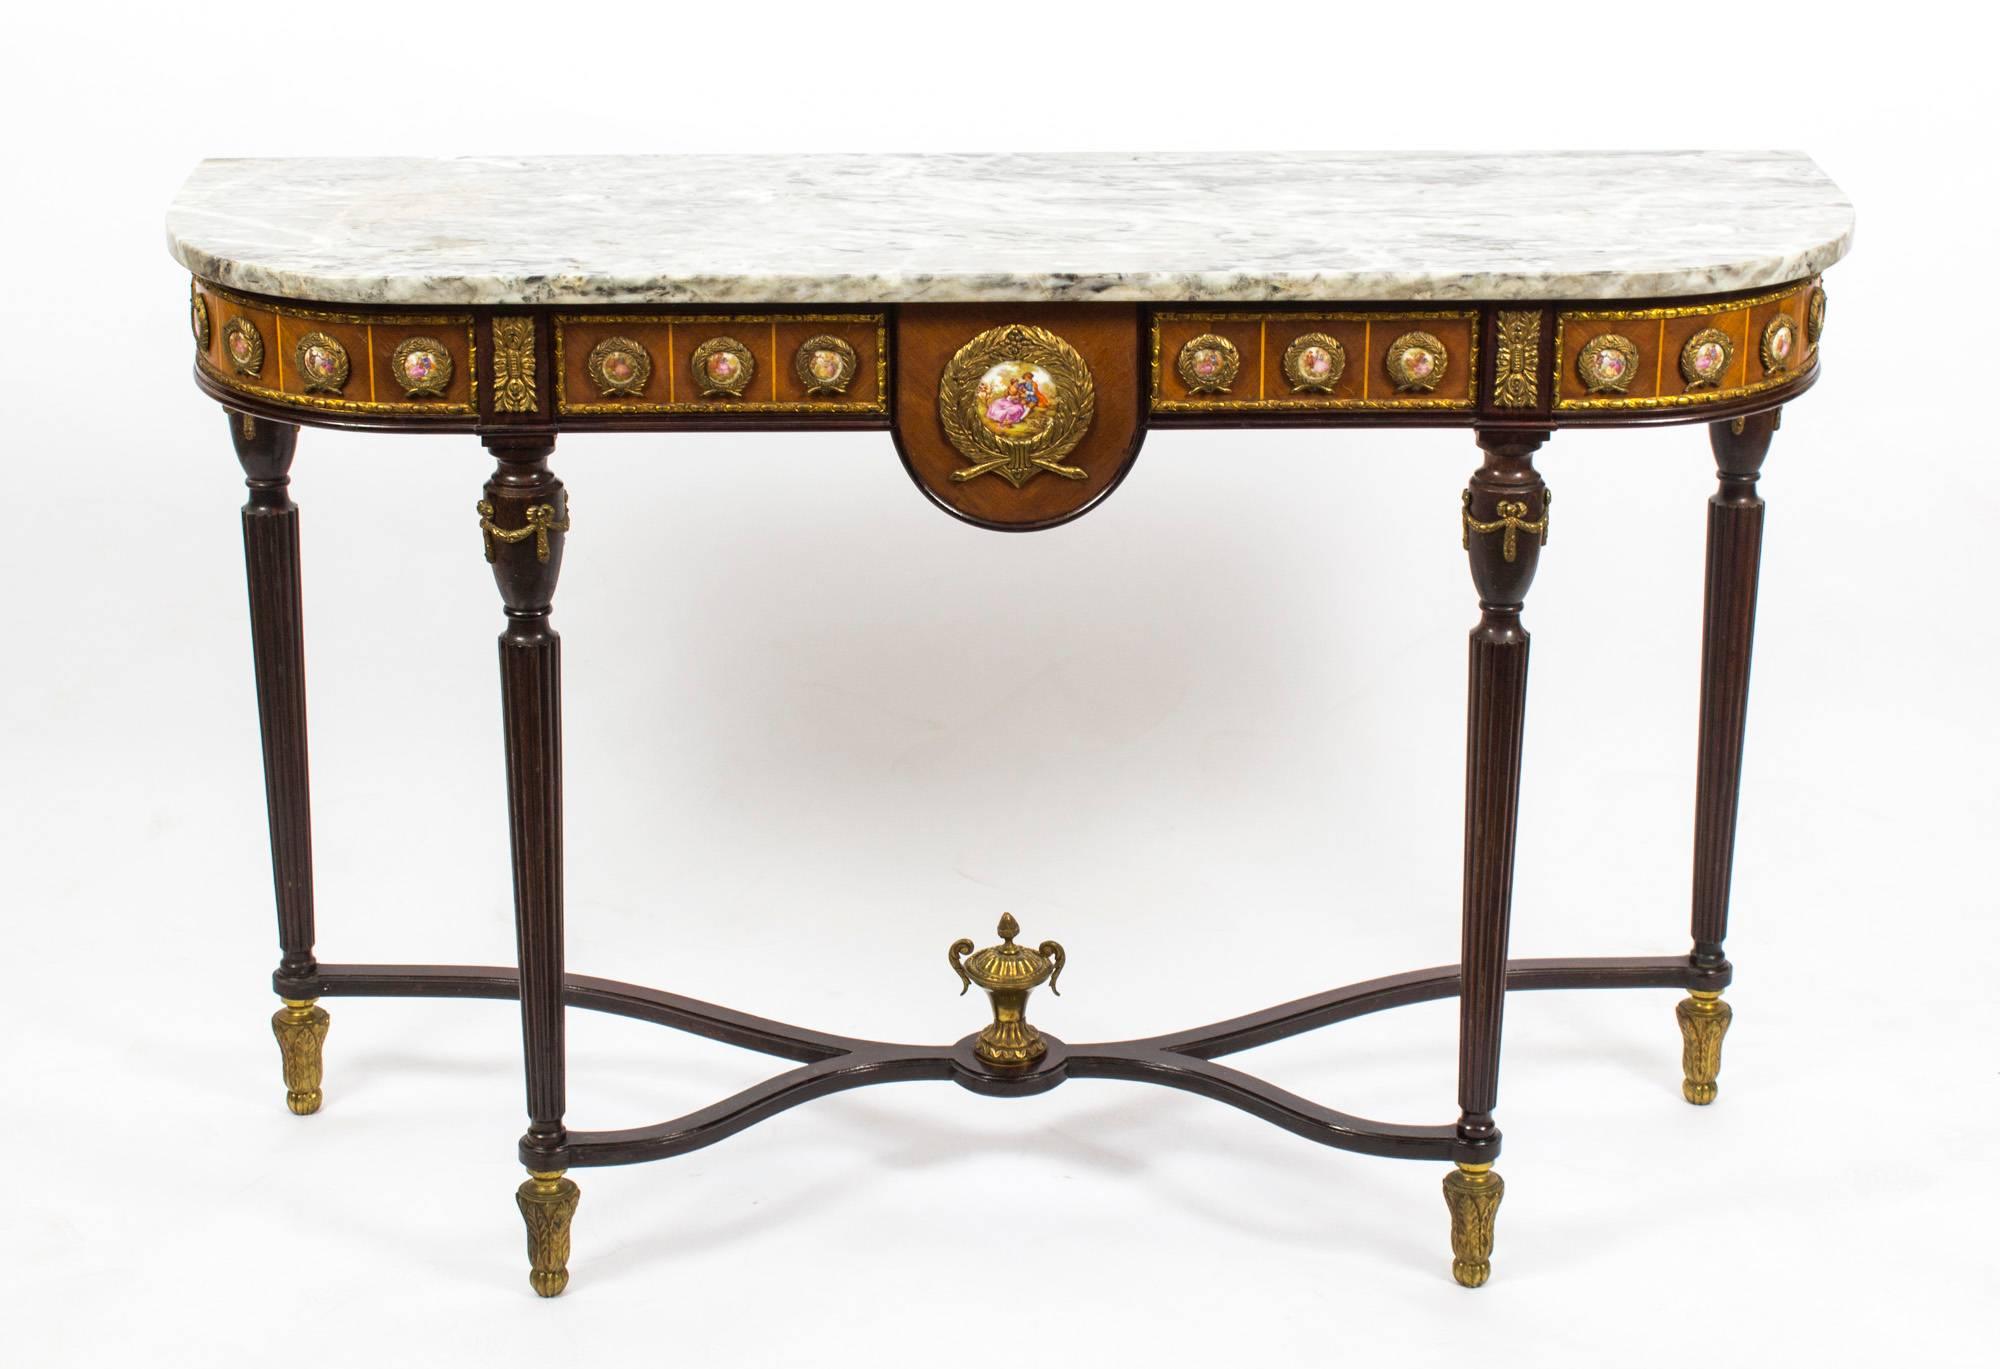 This is an elegant French Louis Revival console table dating from the 1970s.

This magnificent piece is crafted from walnut and features a plethora of Sevres style porcelain plaques, superb ormolu mounts and a beautiful 'Gris St Anne' marble